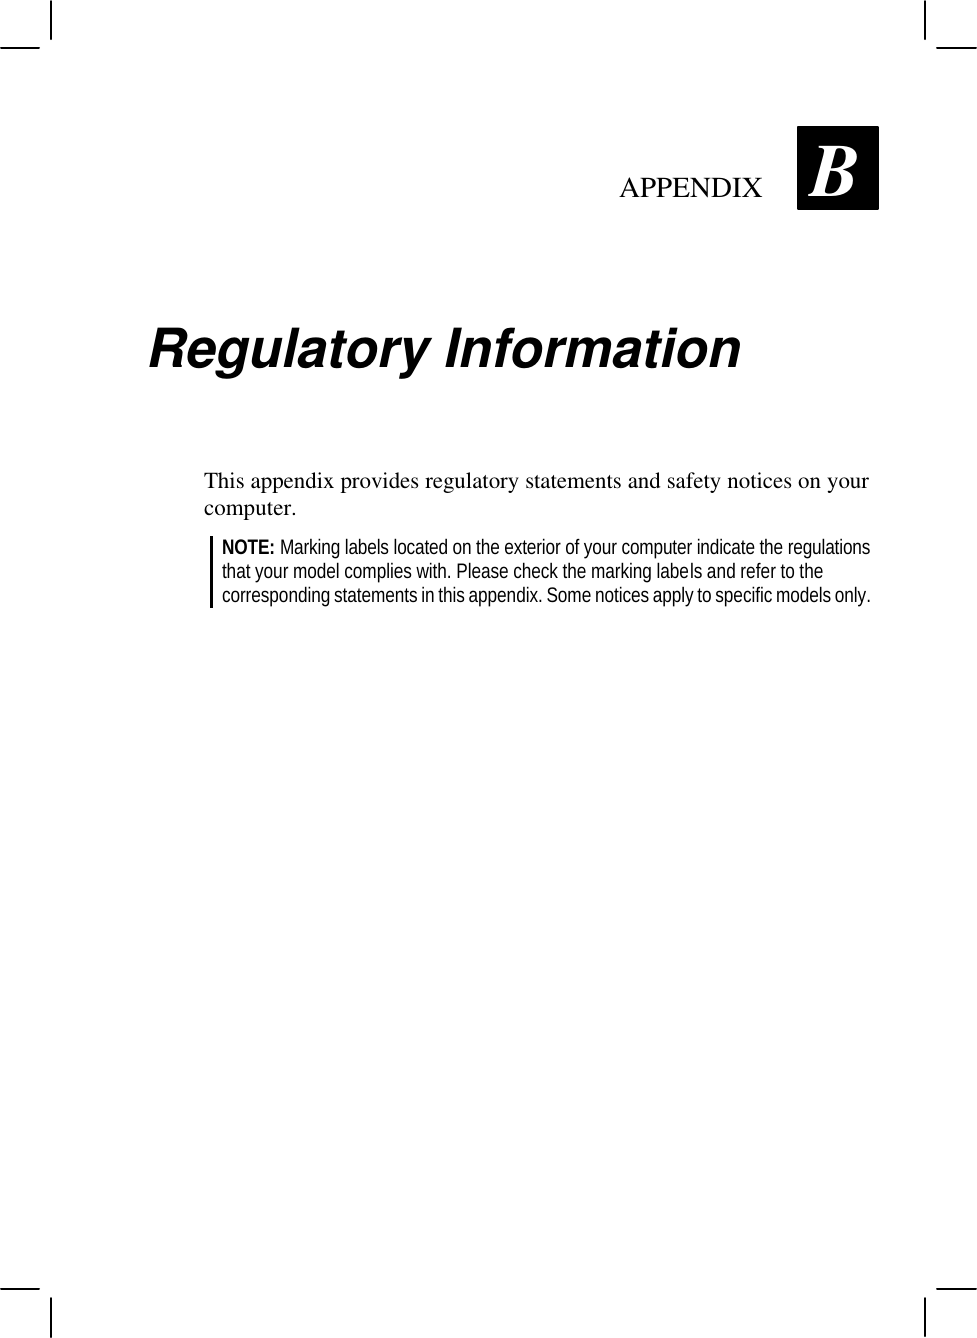   APPENDIX B Regulatory Information This appendix provides regulatory statements and safety notices on your computer. NOTE: Marking labels located on the exterior of your computer indicate the regulations that your model complies with. Please check the marking labels and refer to the corresponding statements in this appendix. Some notices apply to specific models only.  